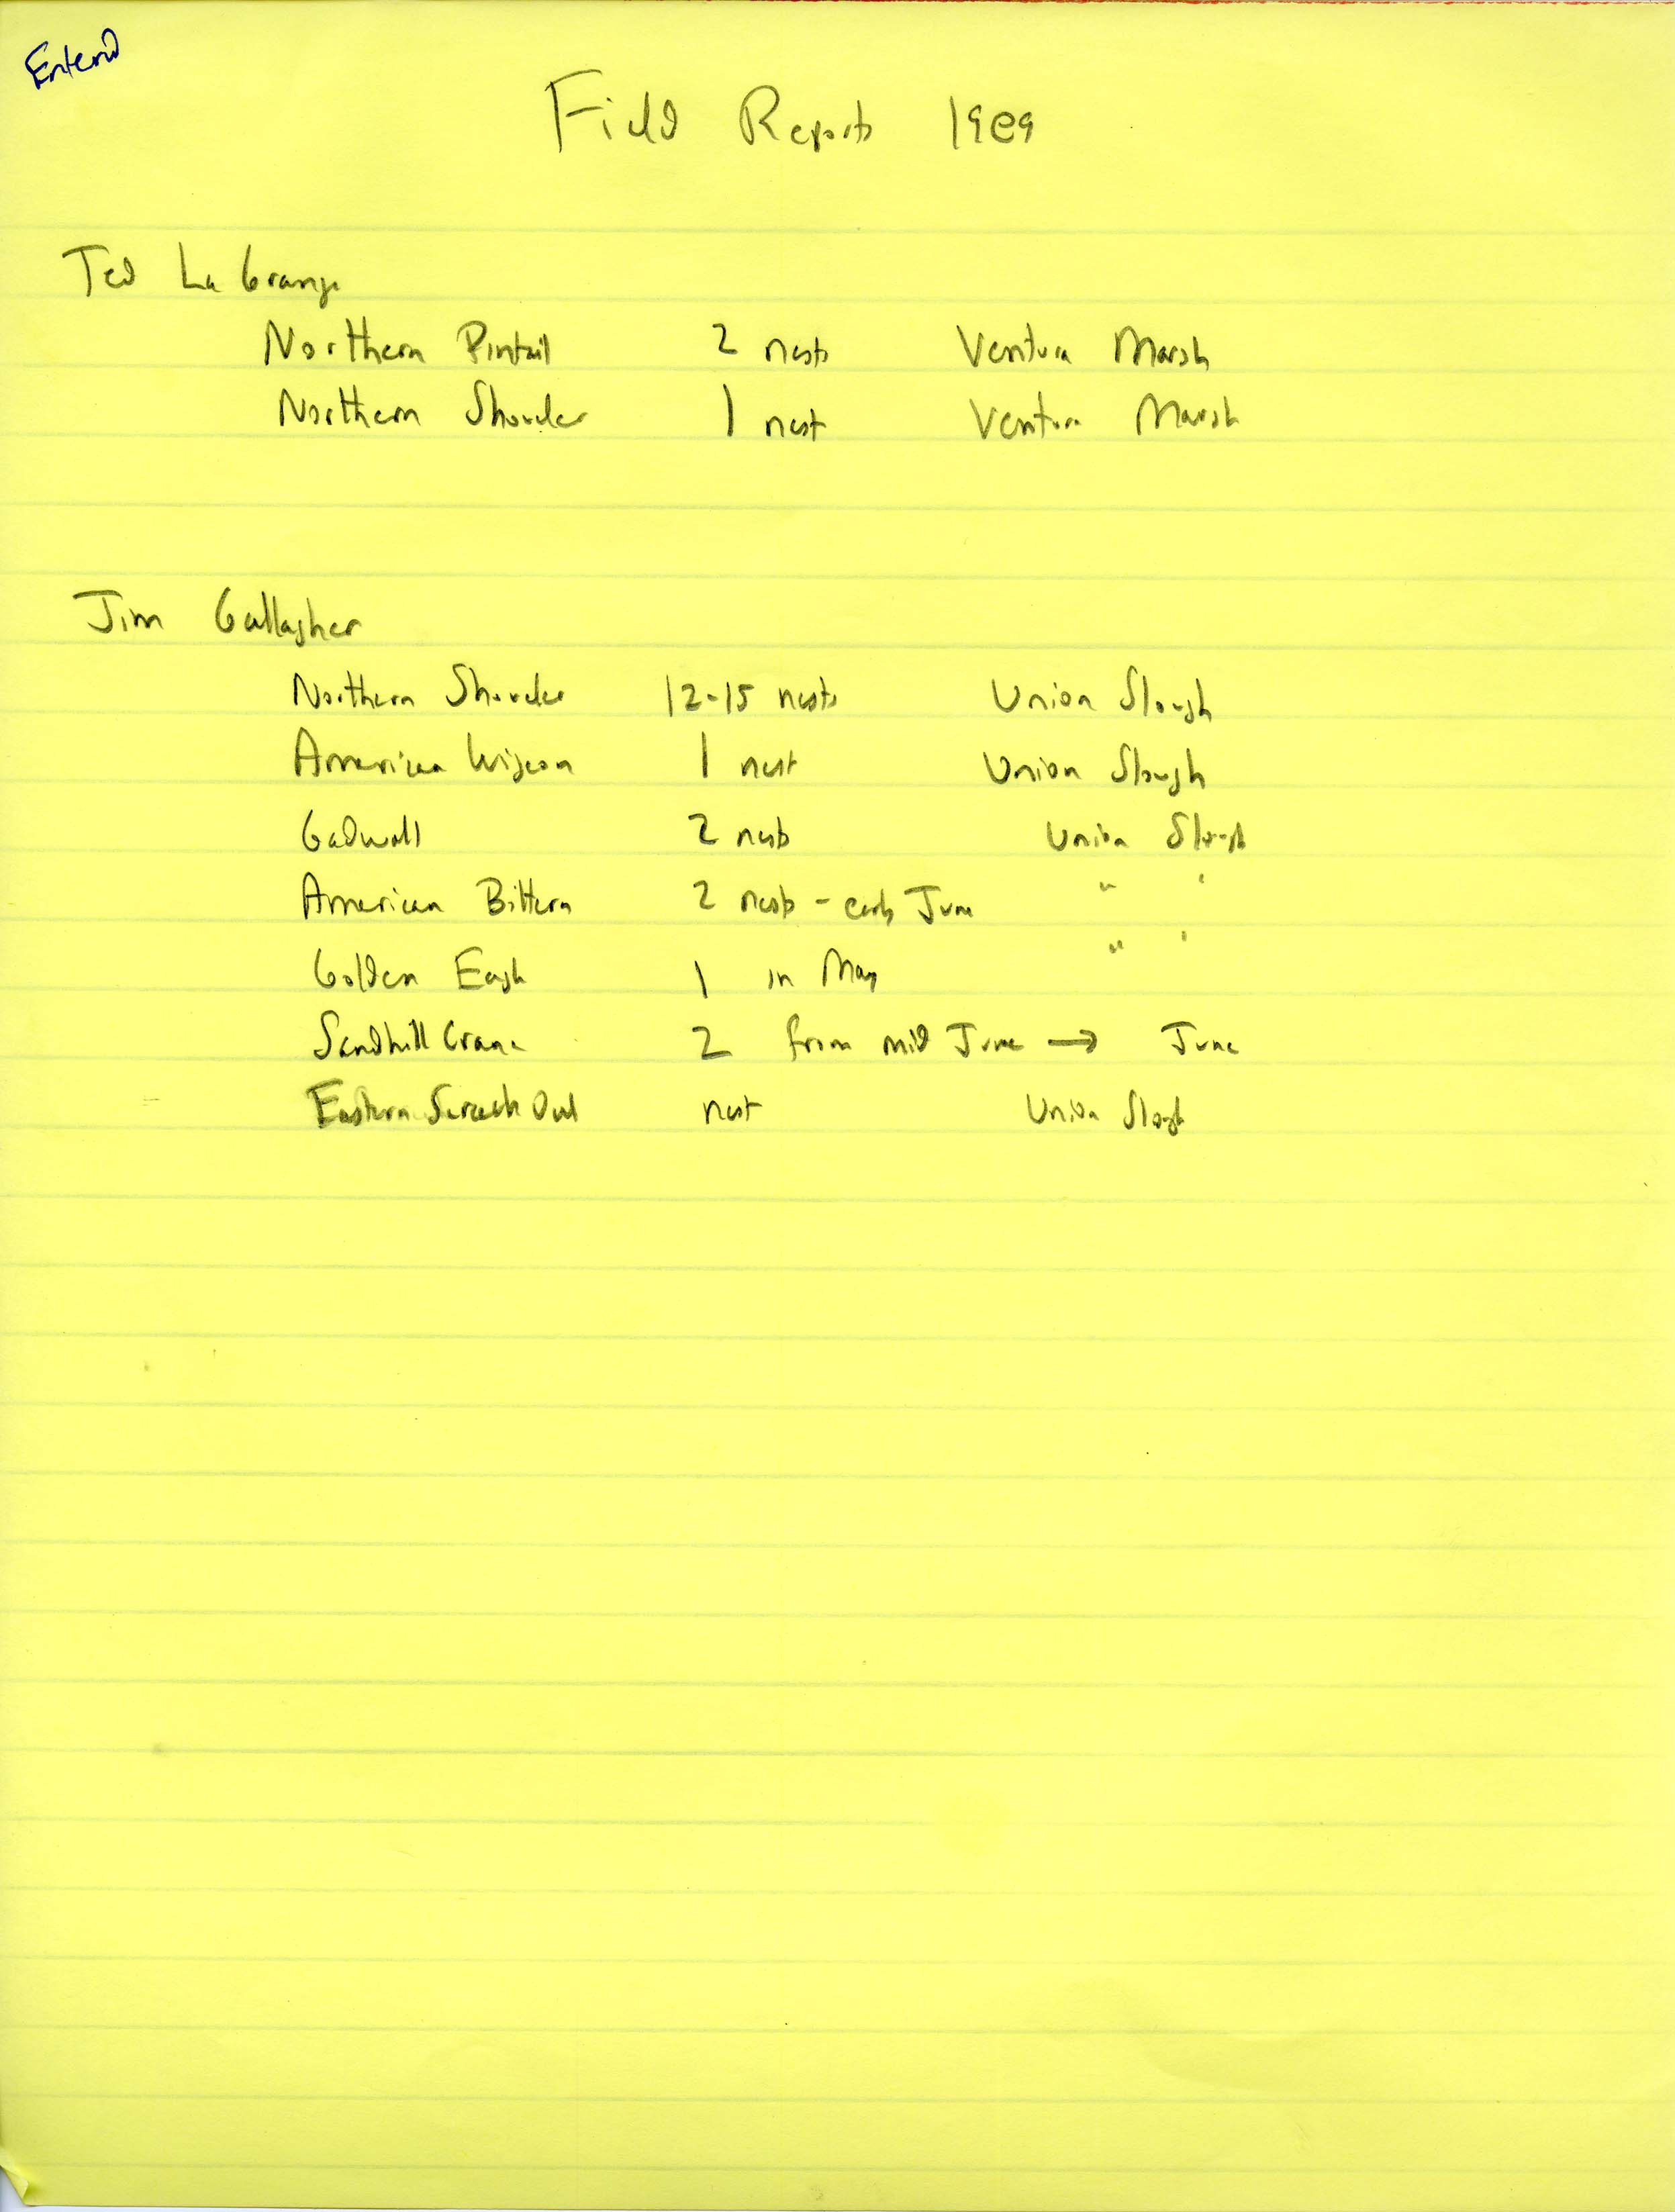 Field notes contributed by Ted LaGrange and Jim Gallagher, summer 1989